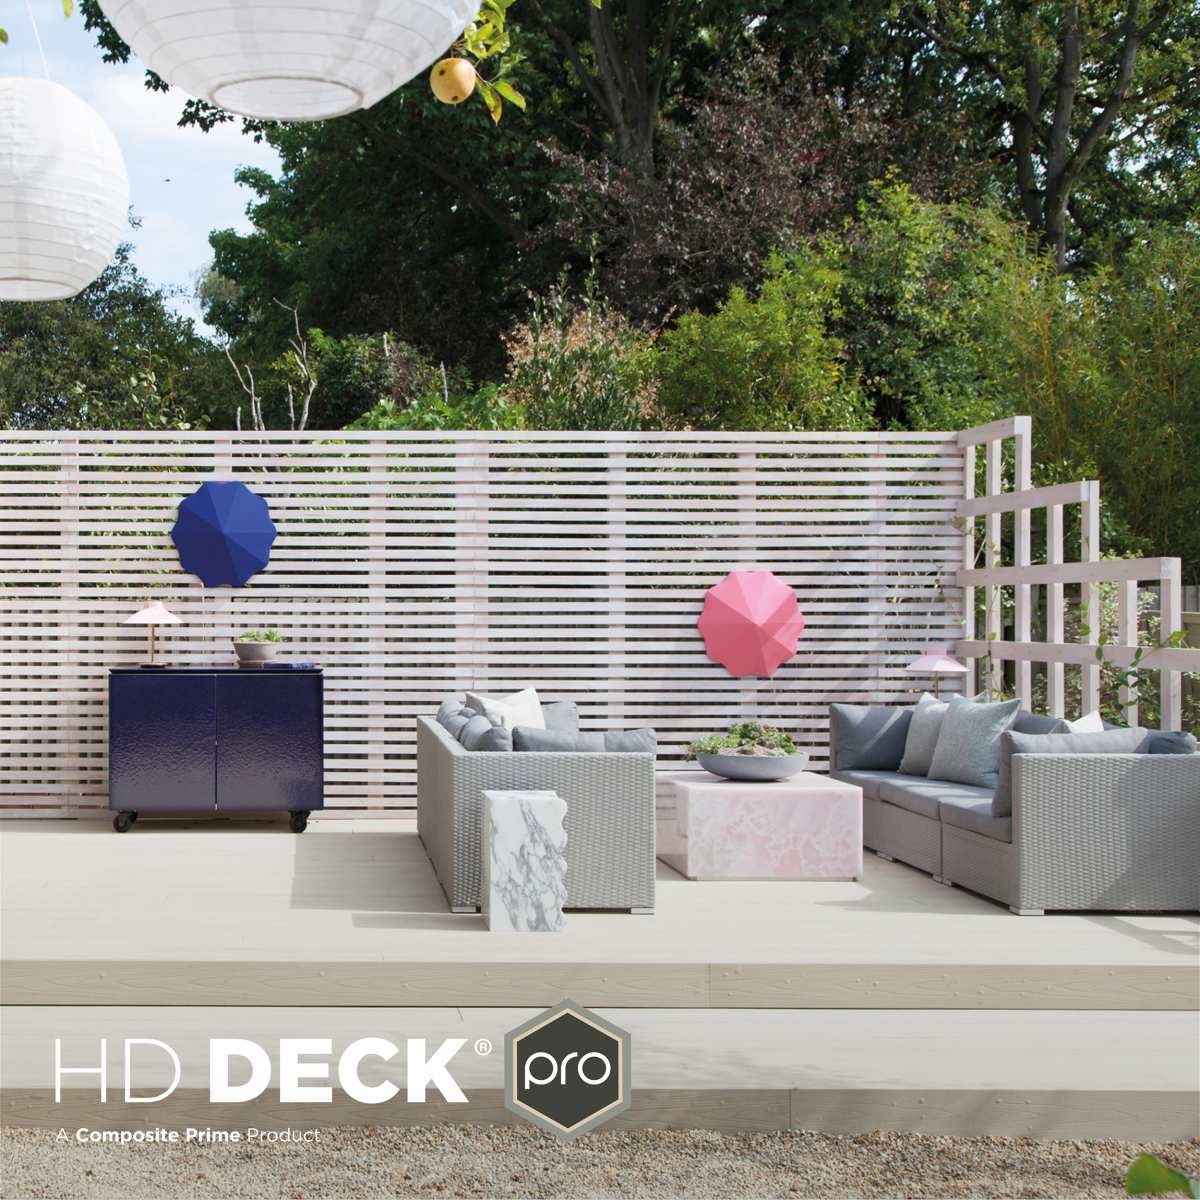 HD Deck Pro CP 6 Image by Websters Timber